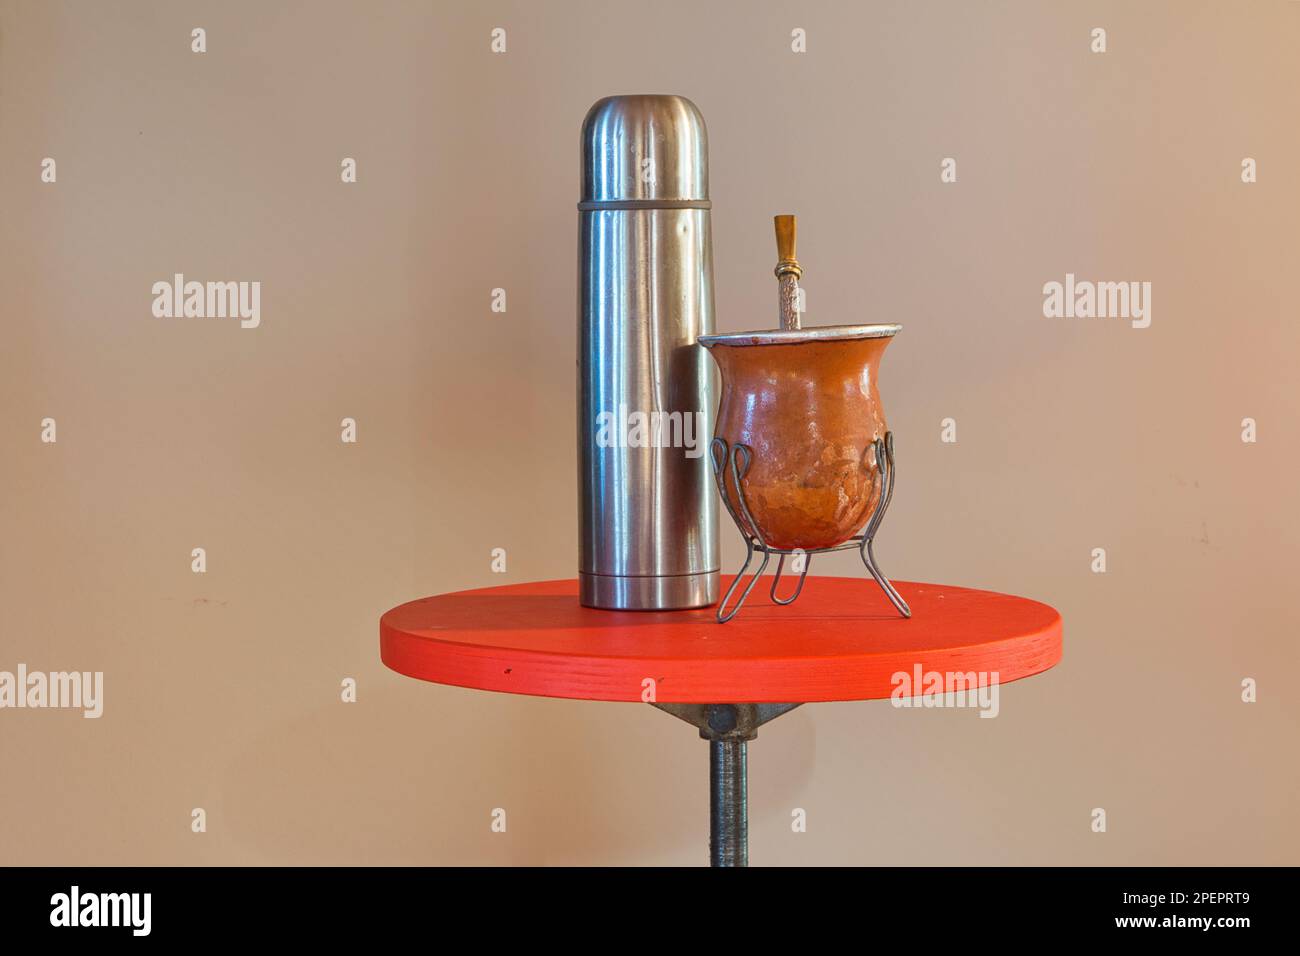 https://c8.alamy.com/comp/2PEPRT9/mate-with-bombillas-and-thermos-traditional-way-of-drinking-yerba-mate-tea-in-south-america-2PEPRT9.jpg